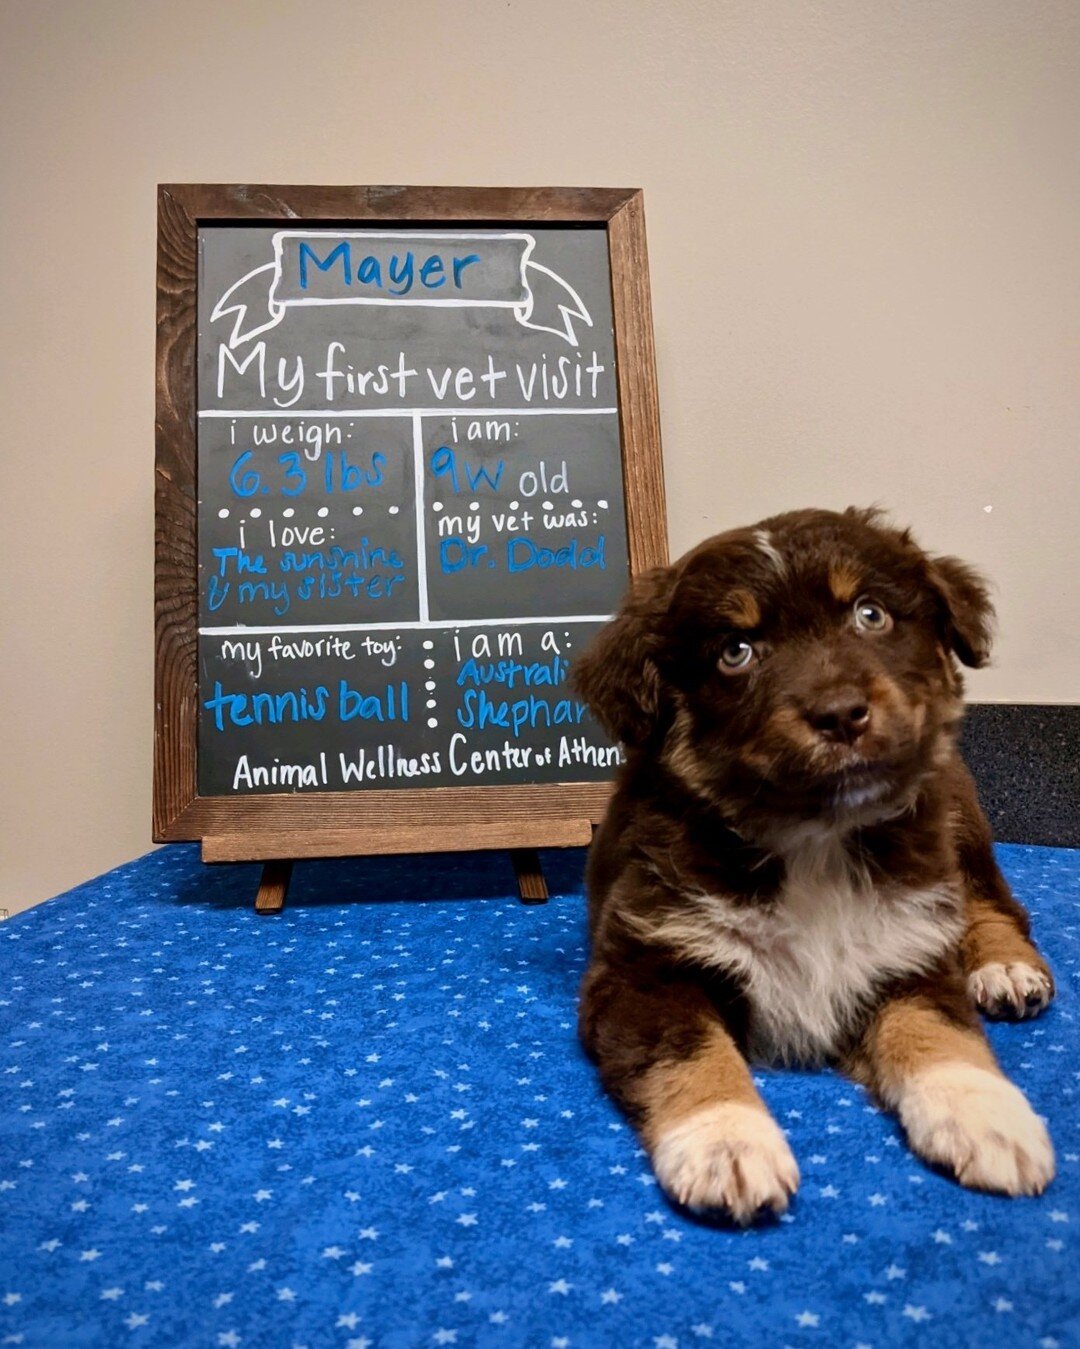 Mayer was such a joy! This little fur ball weighed in at a whopping 6 pounds! He posed for his pictures like such a big boy! Huge thanks to his mom for allowing us to care for sweet Mayer!